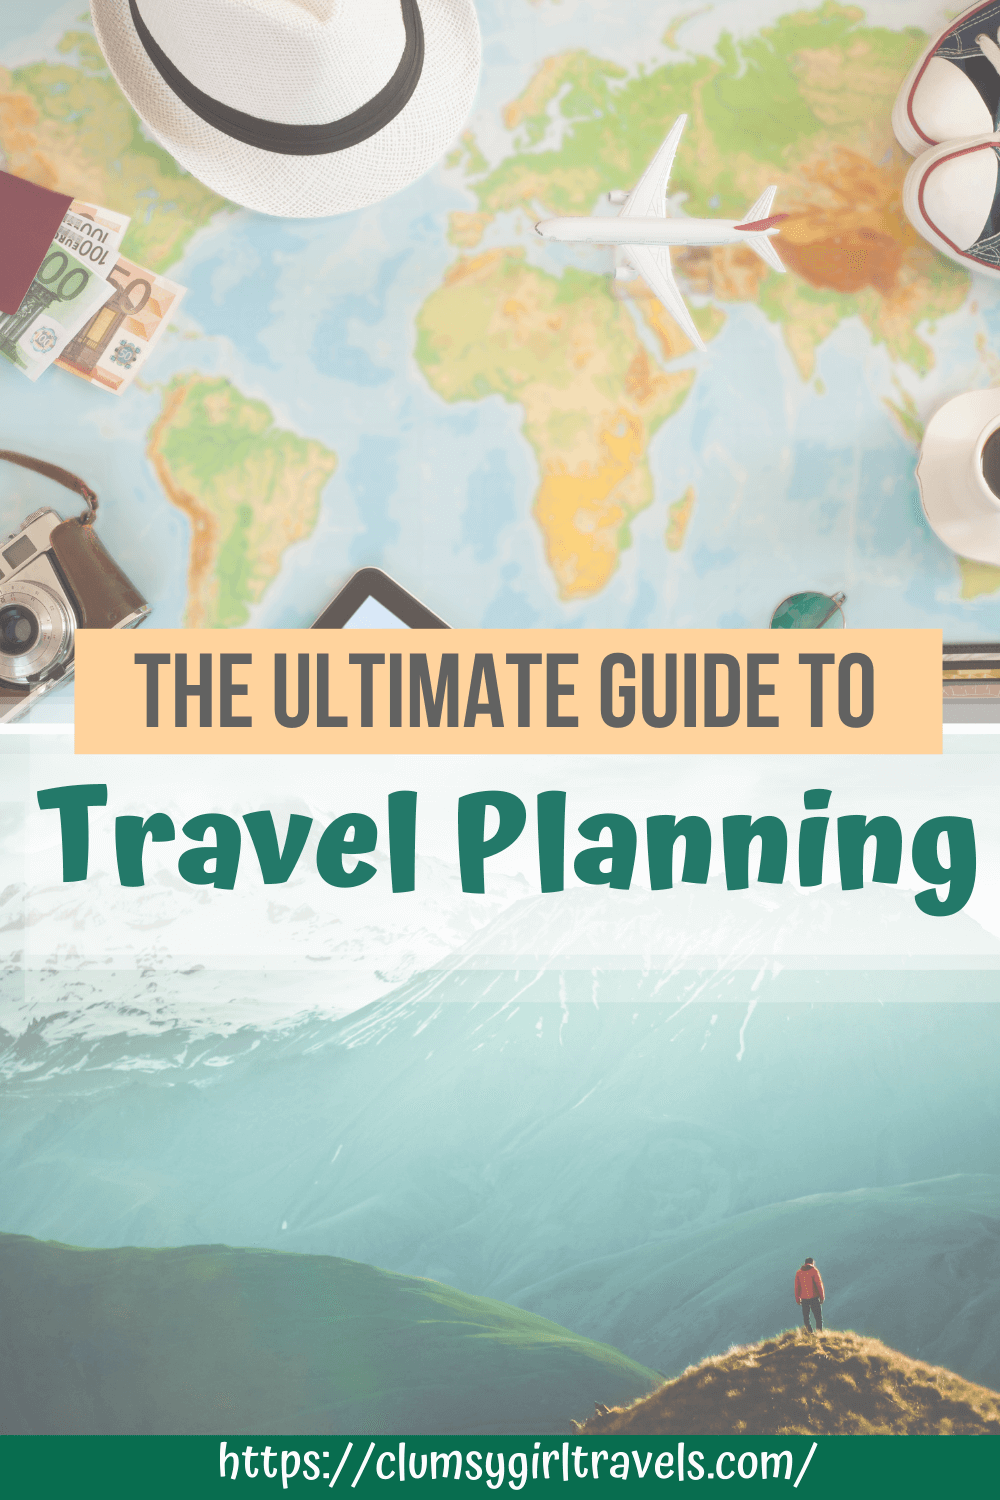 Travel planning can be overwhelming, but with this step by step trip planning guide, you will plan the perfect vacation in no time! #travelplanning #travelplanner #tripplanner